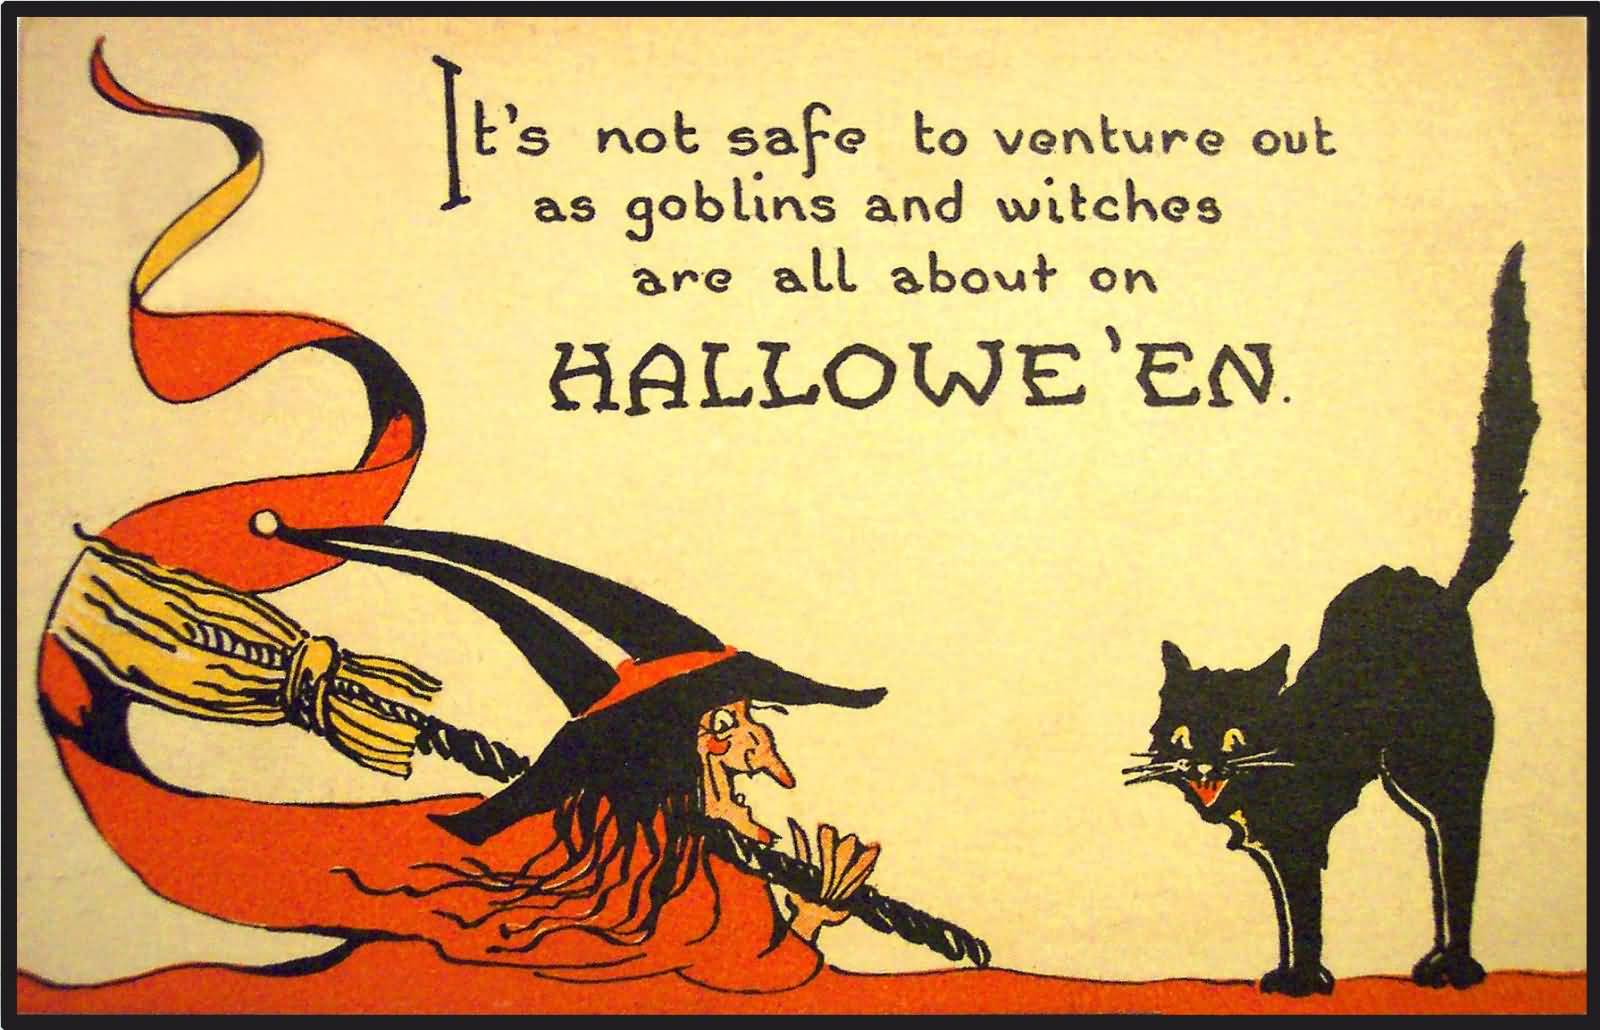 It's Not Safe To Venture Out As Goblins And Witches Are All About On Halloween